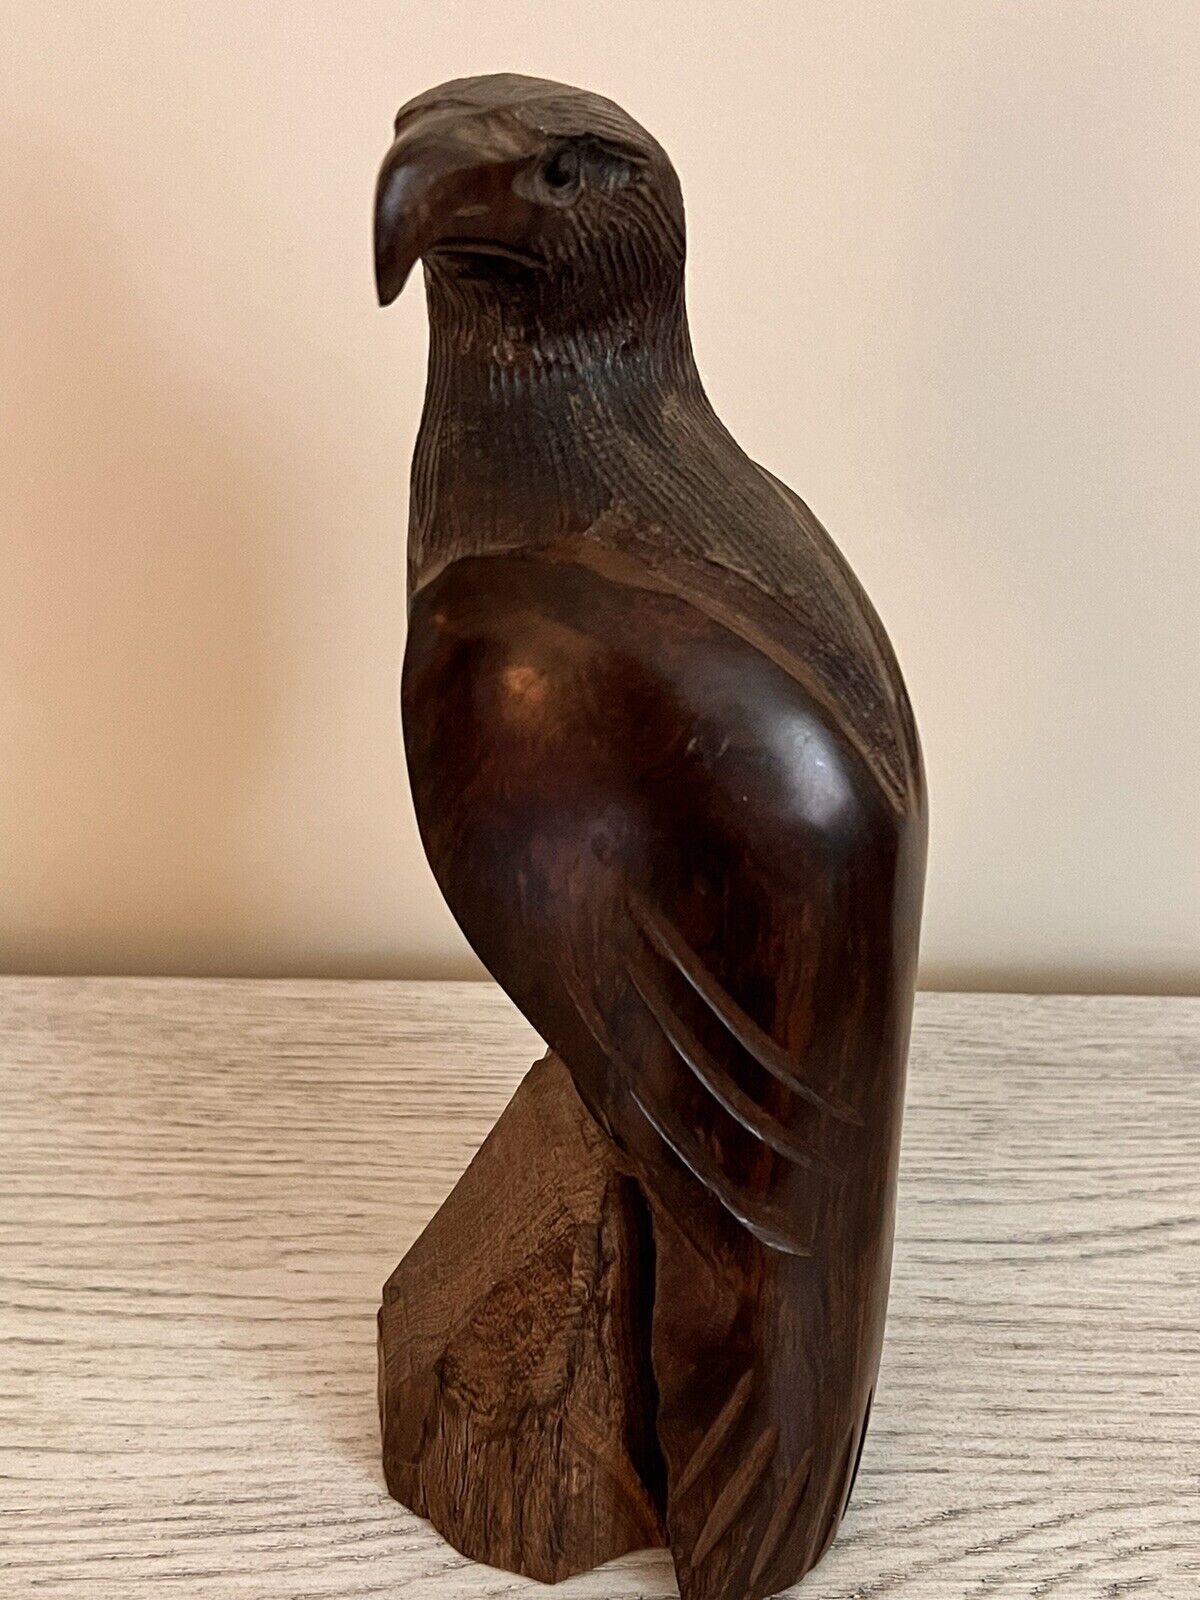 Vintage Ironwood Bird of Prey Art 11” Hand Carved Eagle Falcon Sculpture